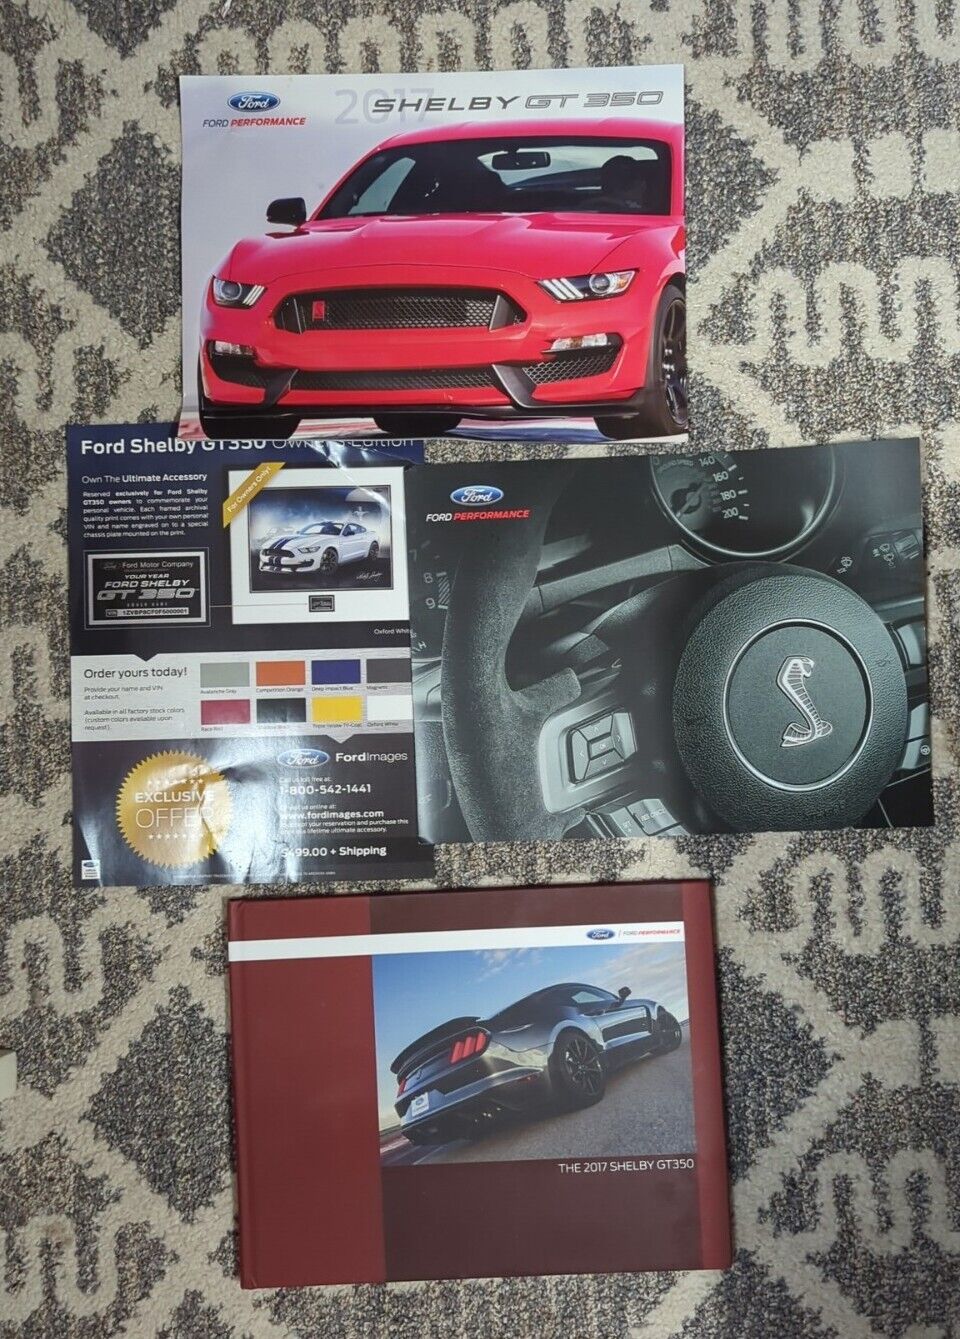 Ford Shelby 2017 GT350 Dealer Exclusive Hardcover Coffee Table Book